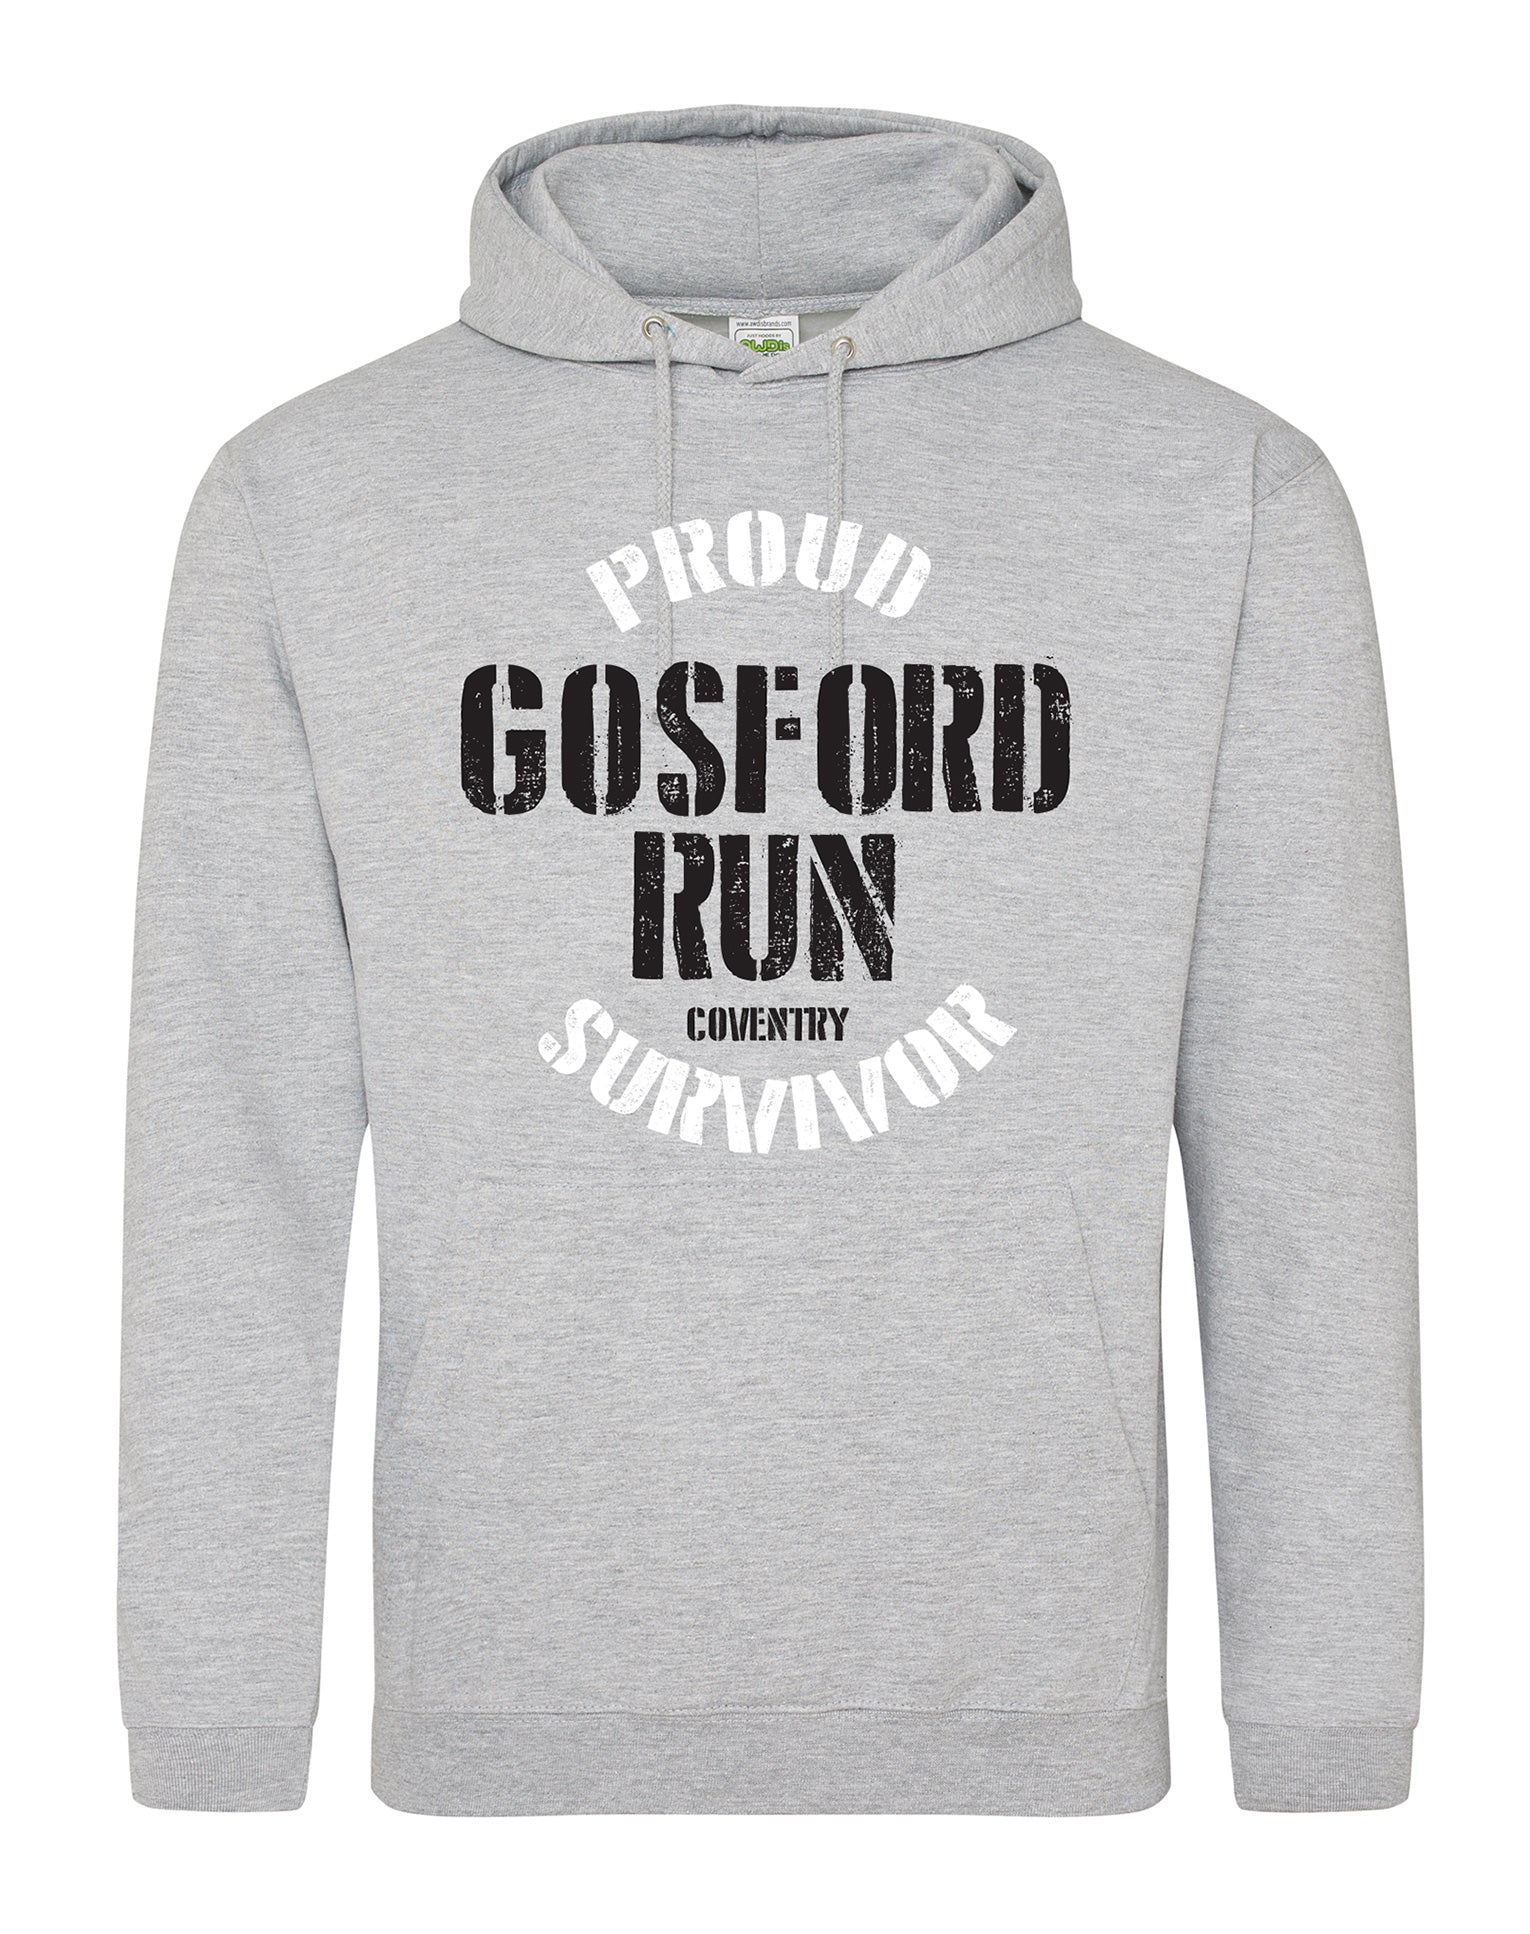 Proud Gosford Run Survivor unisex fit hoodie - various colours - Dirty Stop Outs